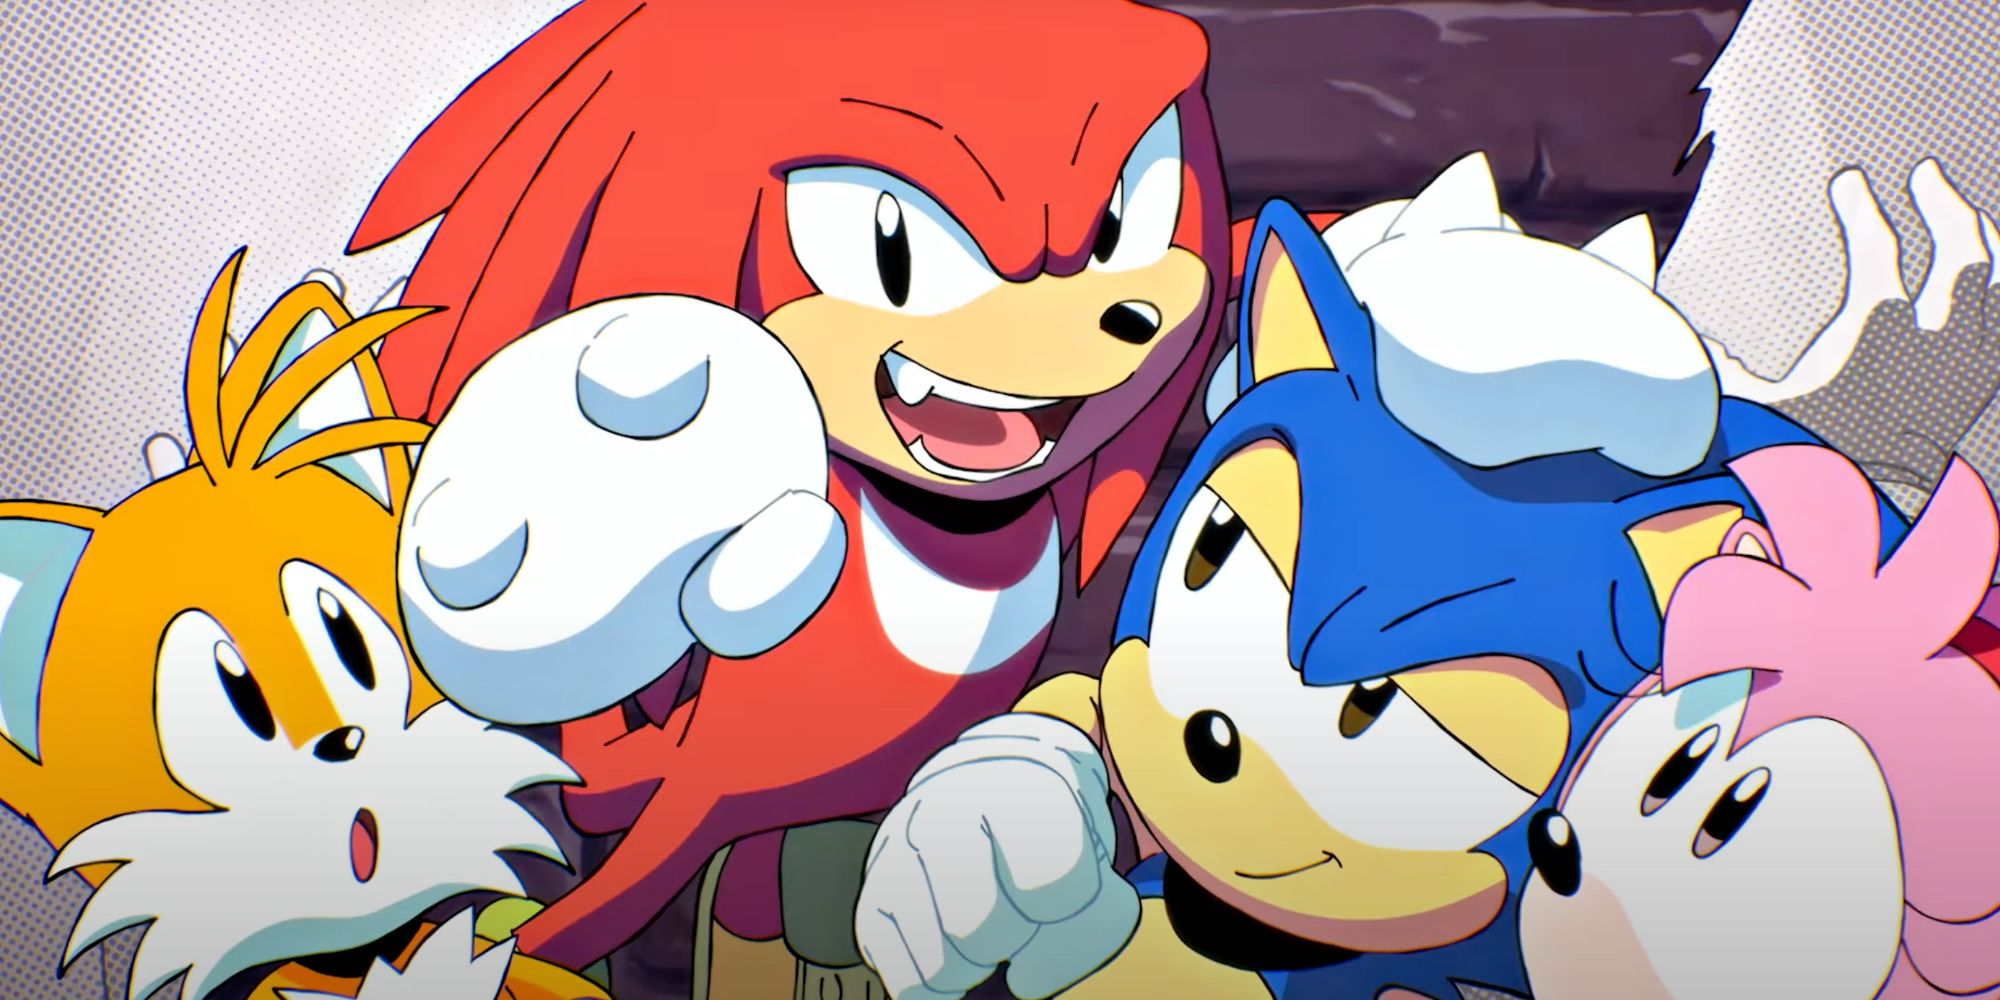 In addition to the four remastered games, Sonic Origins will include brand new Sonic the Hedgehog animated content